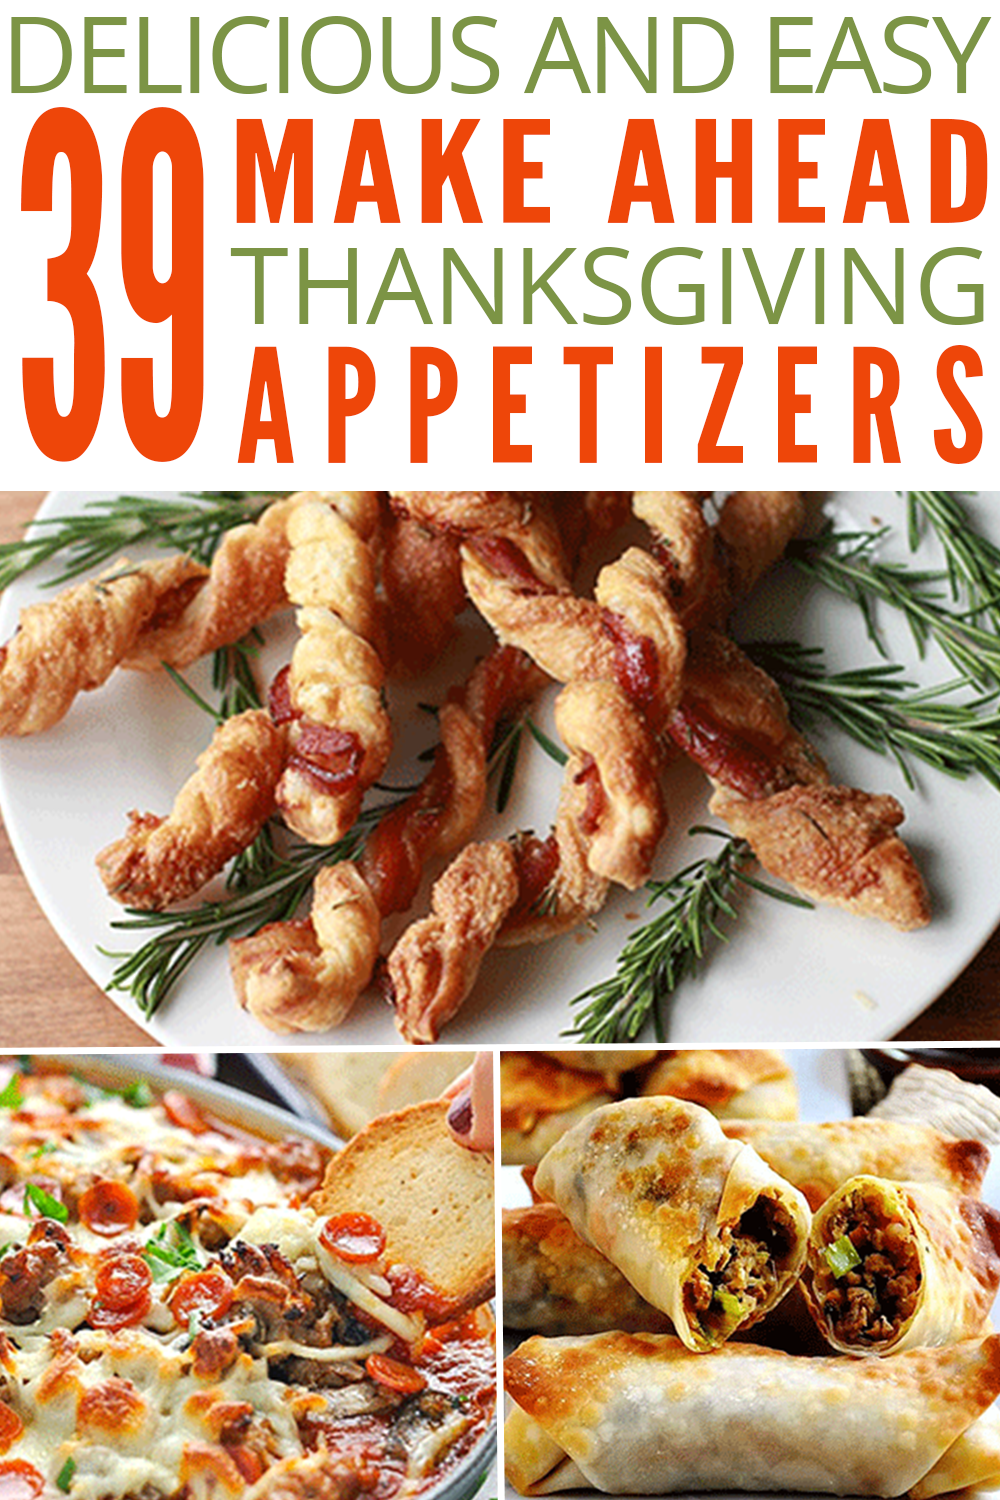 39 Easy and Delicious Make-Ahead Thanksgiving Appetizers | Edit + Nest -   19 thanksgiving appetizers make ahead ideas